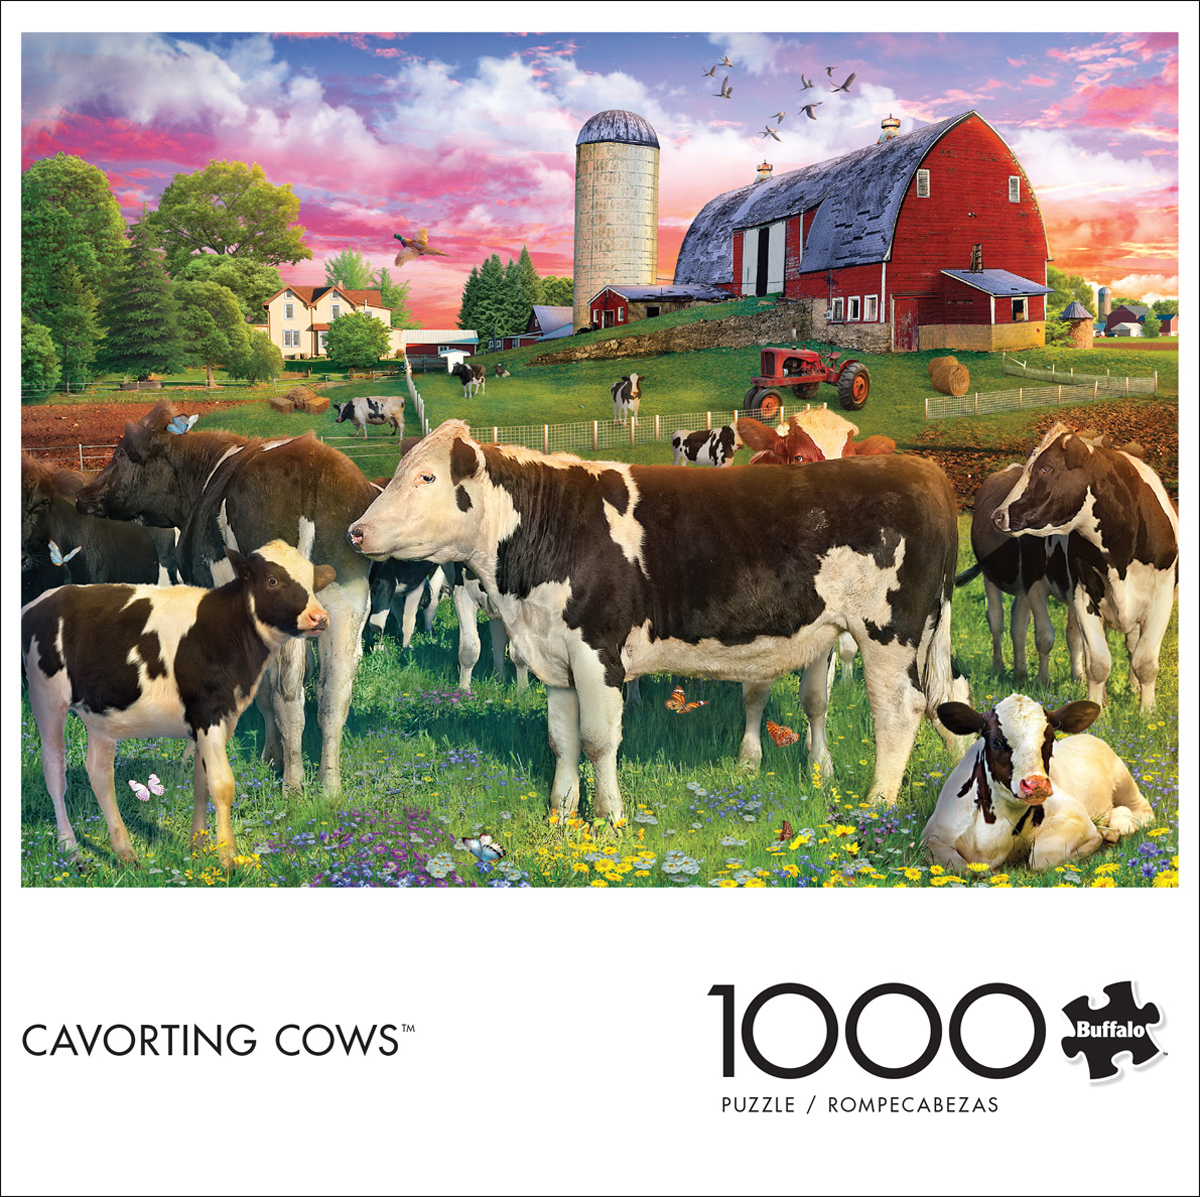 Cavorting Cows